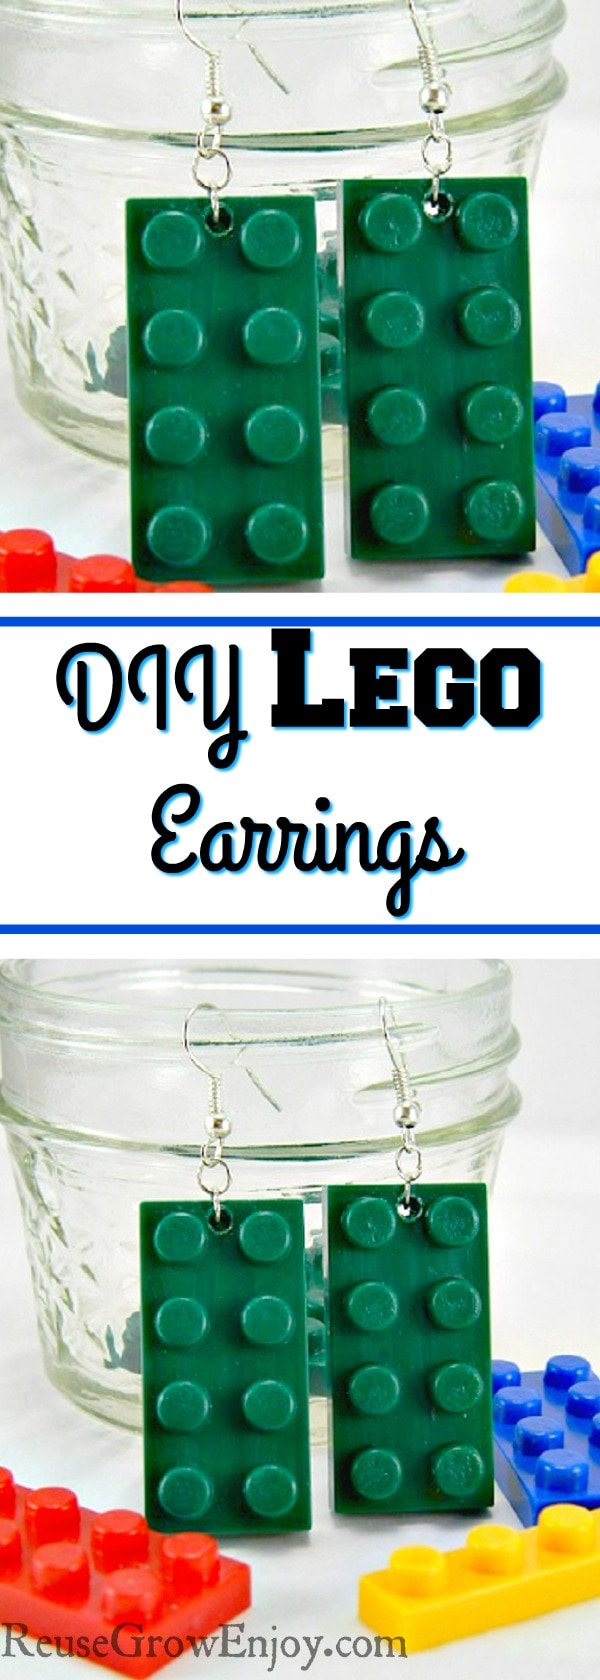 Have some extra Legos kicking around the floor? Check out these cute and easy DIY Lego earrings that are made from upcycled Legos.